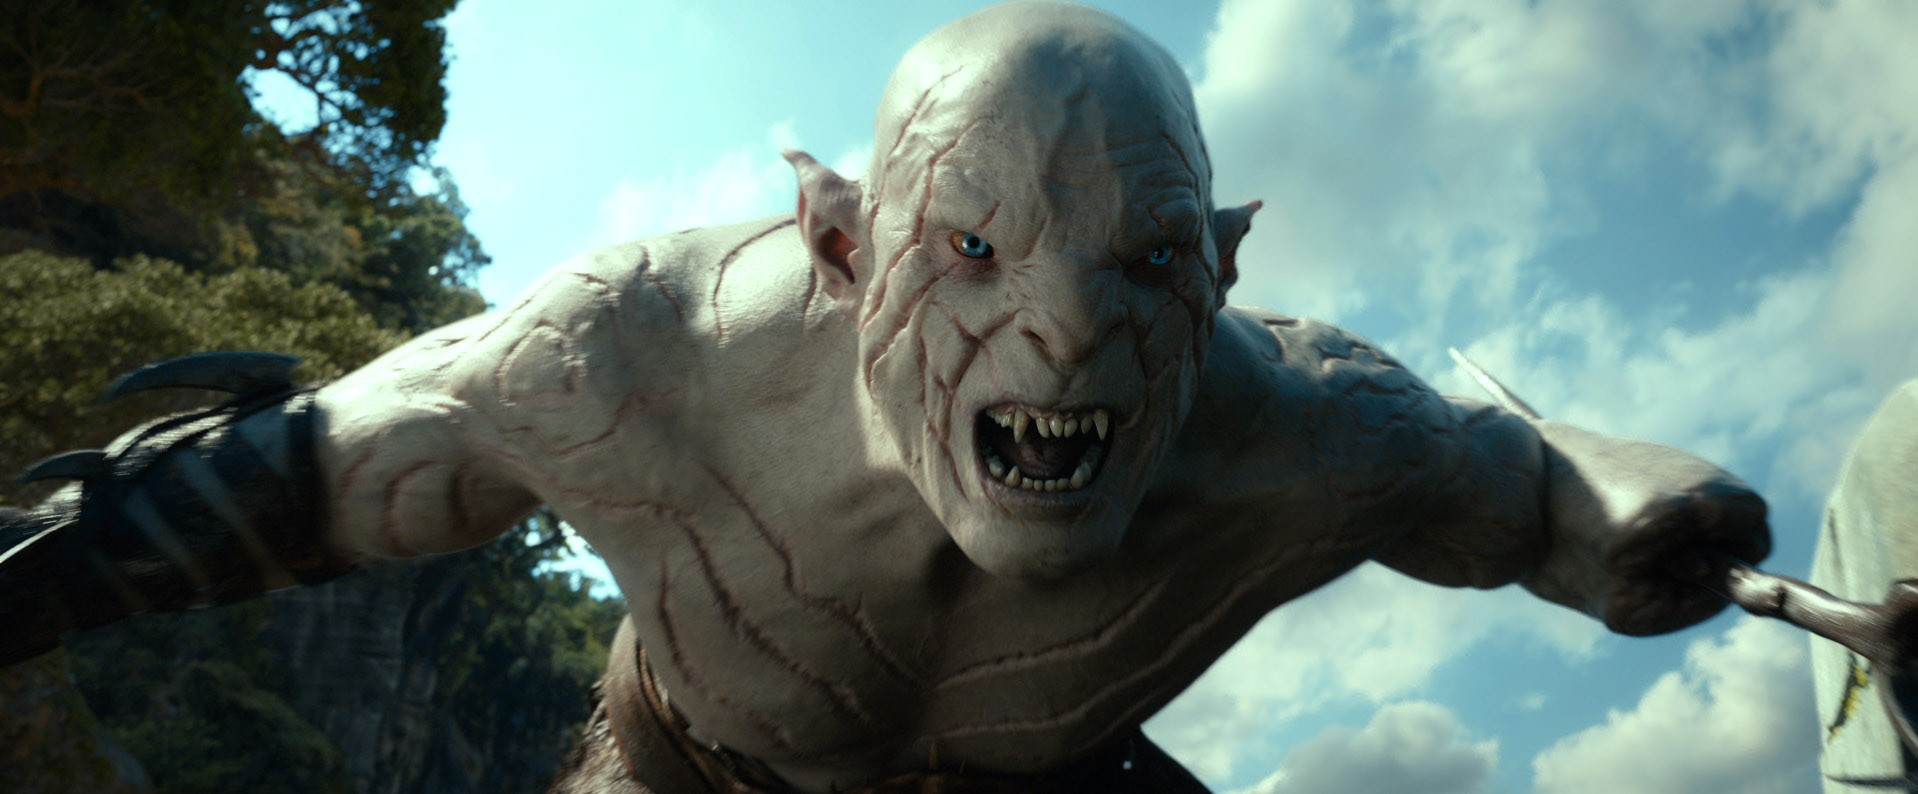 Azog from Warner Bros. Pictures' The Hobbit: The Desolation of Smaug (2013)